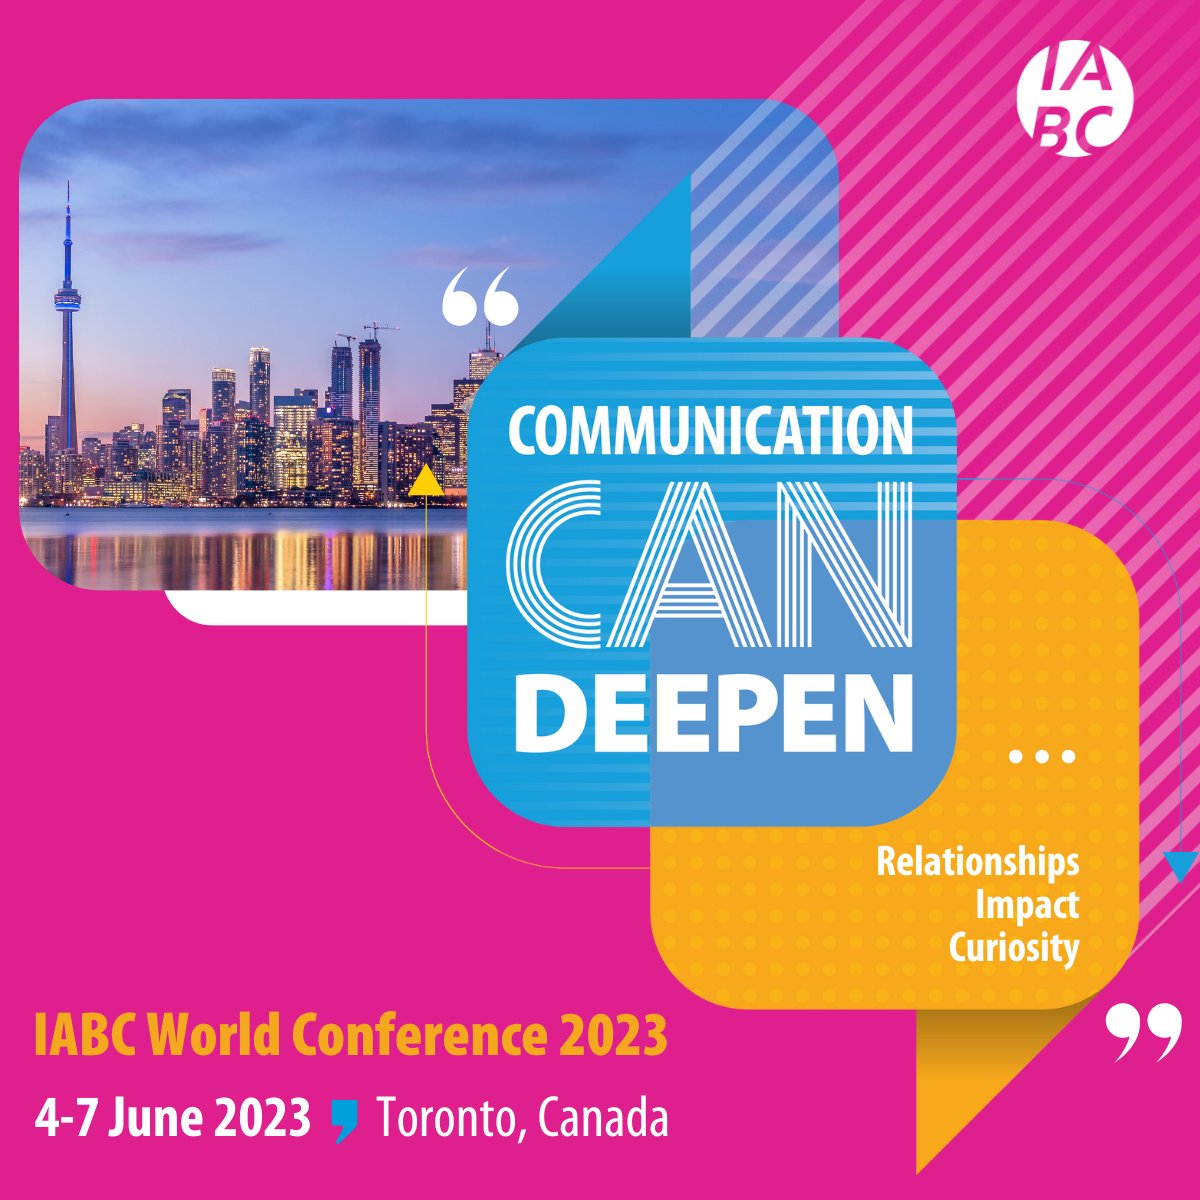 World Conference 2023 is here! We are thrilled to welcome you all to Toronto for several days of learning and connecting. The day will begin with our first round of Masterclasses at 9:00 AM ET. Don’t forget to tag us in your posts with #IABC23!